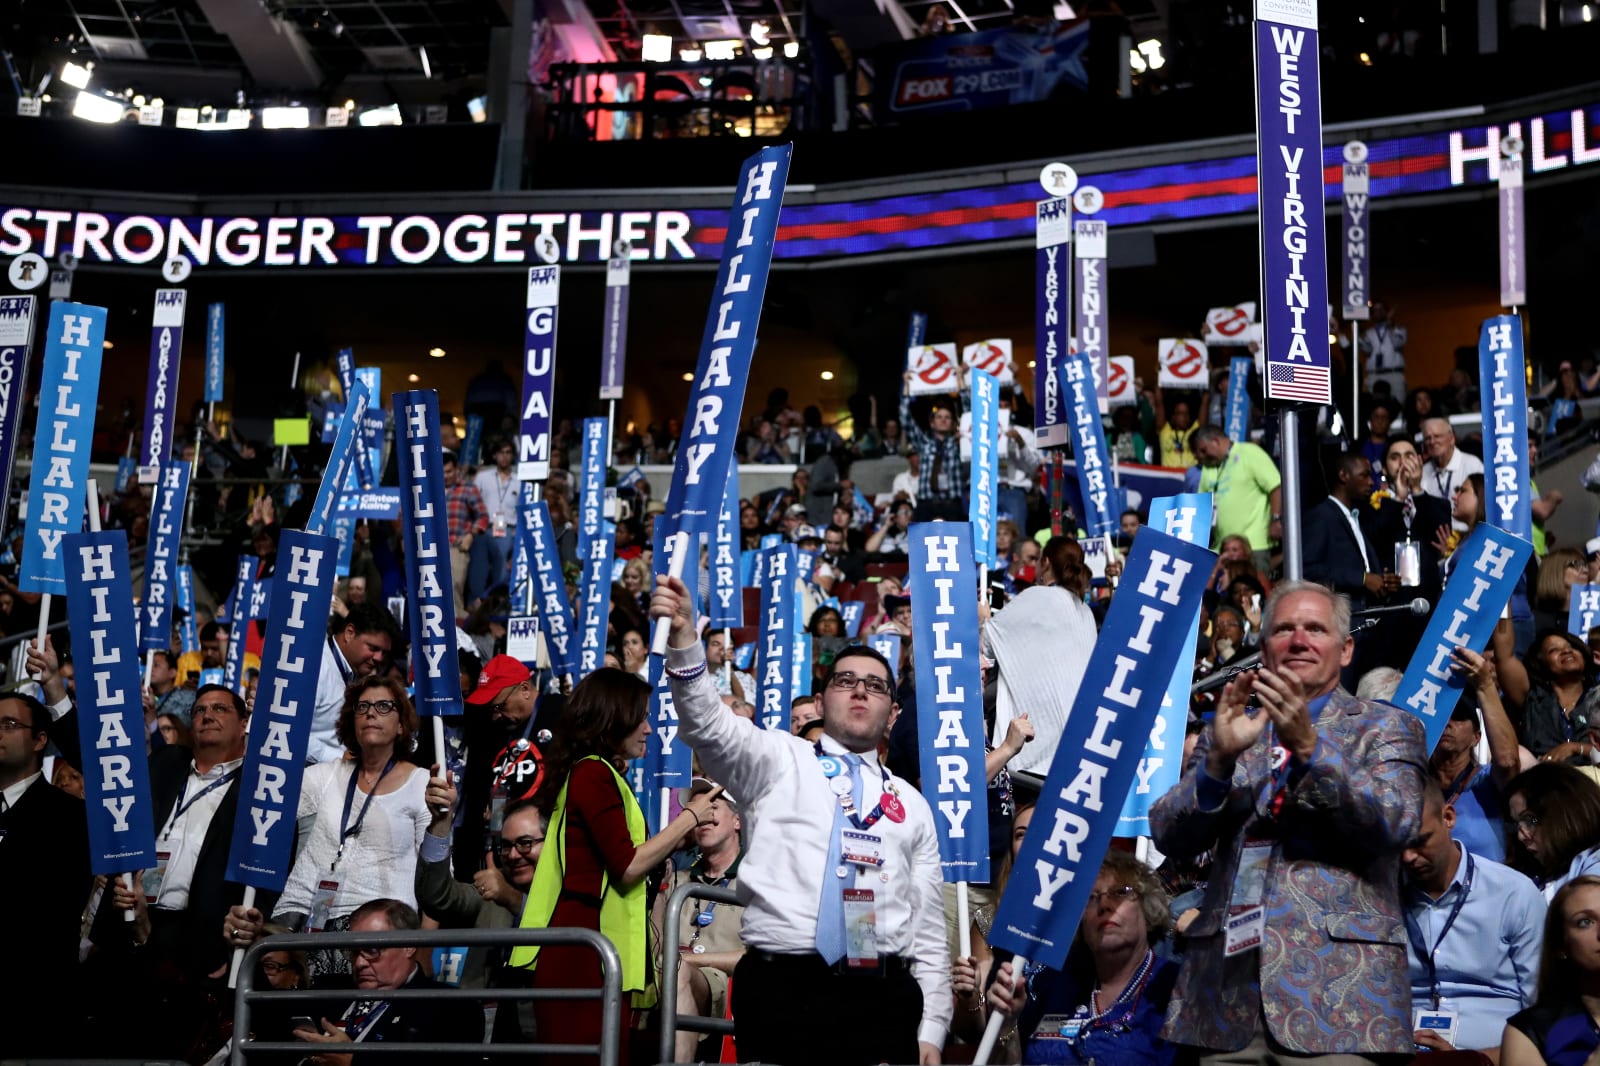 Democratic National Convention: Day Four